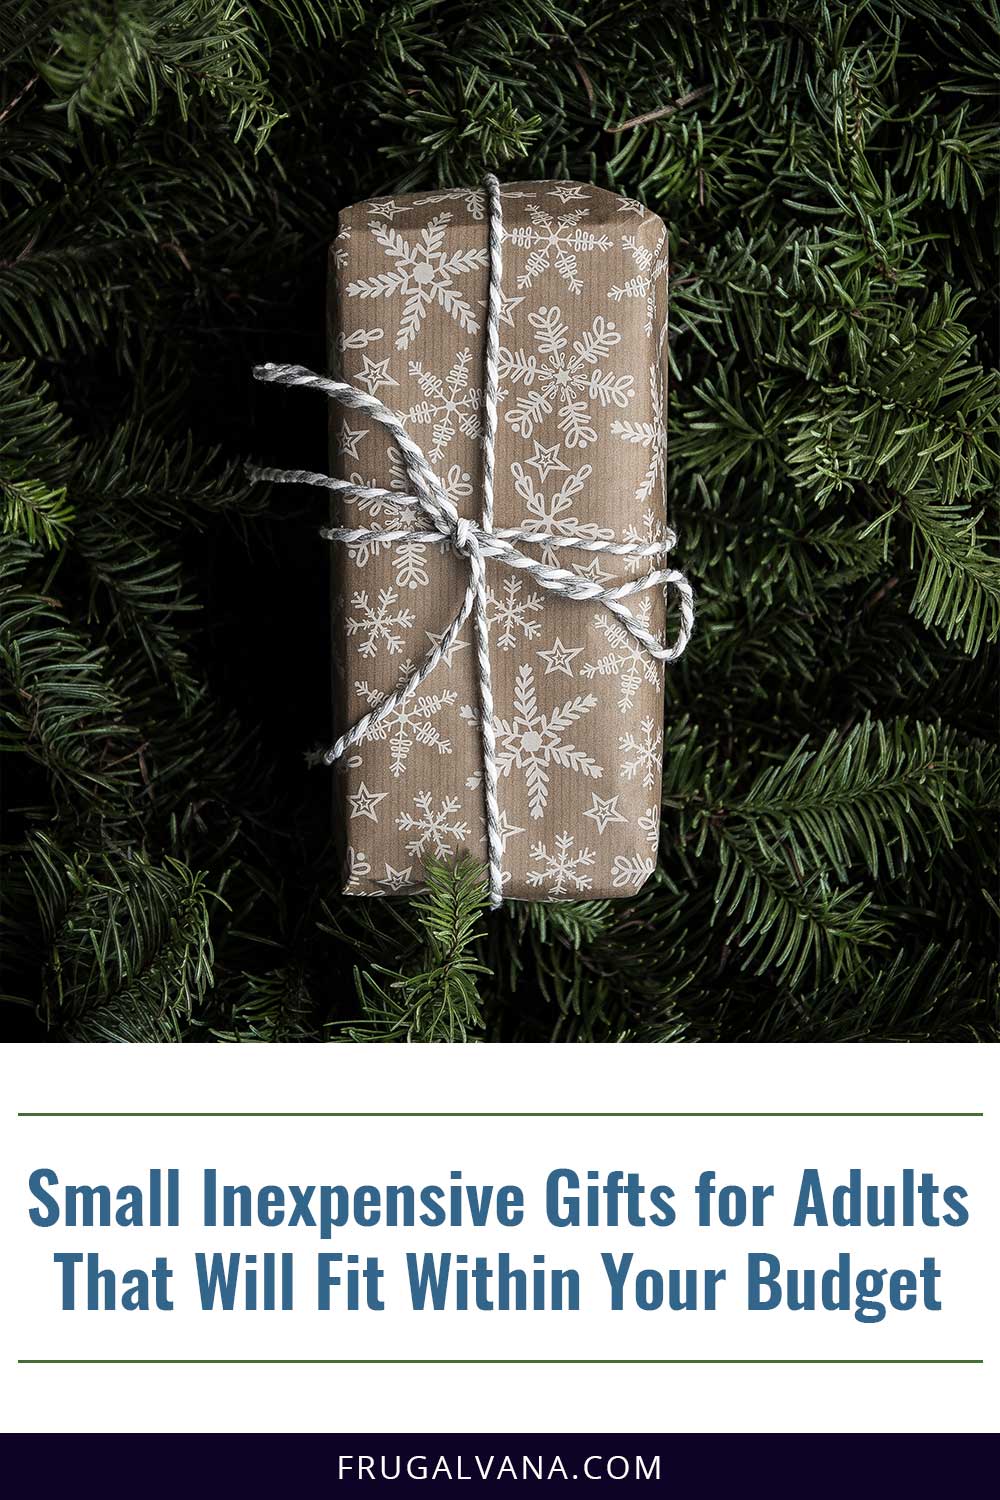 Small Inexpensive Gifts for Adults That Will Fit Within Your Budget